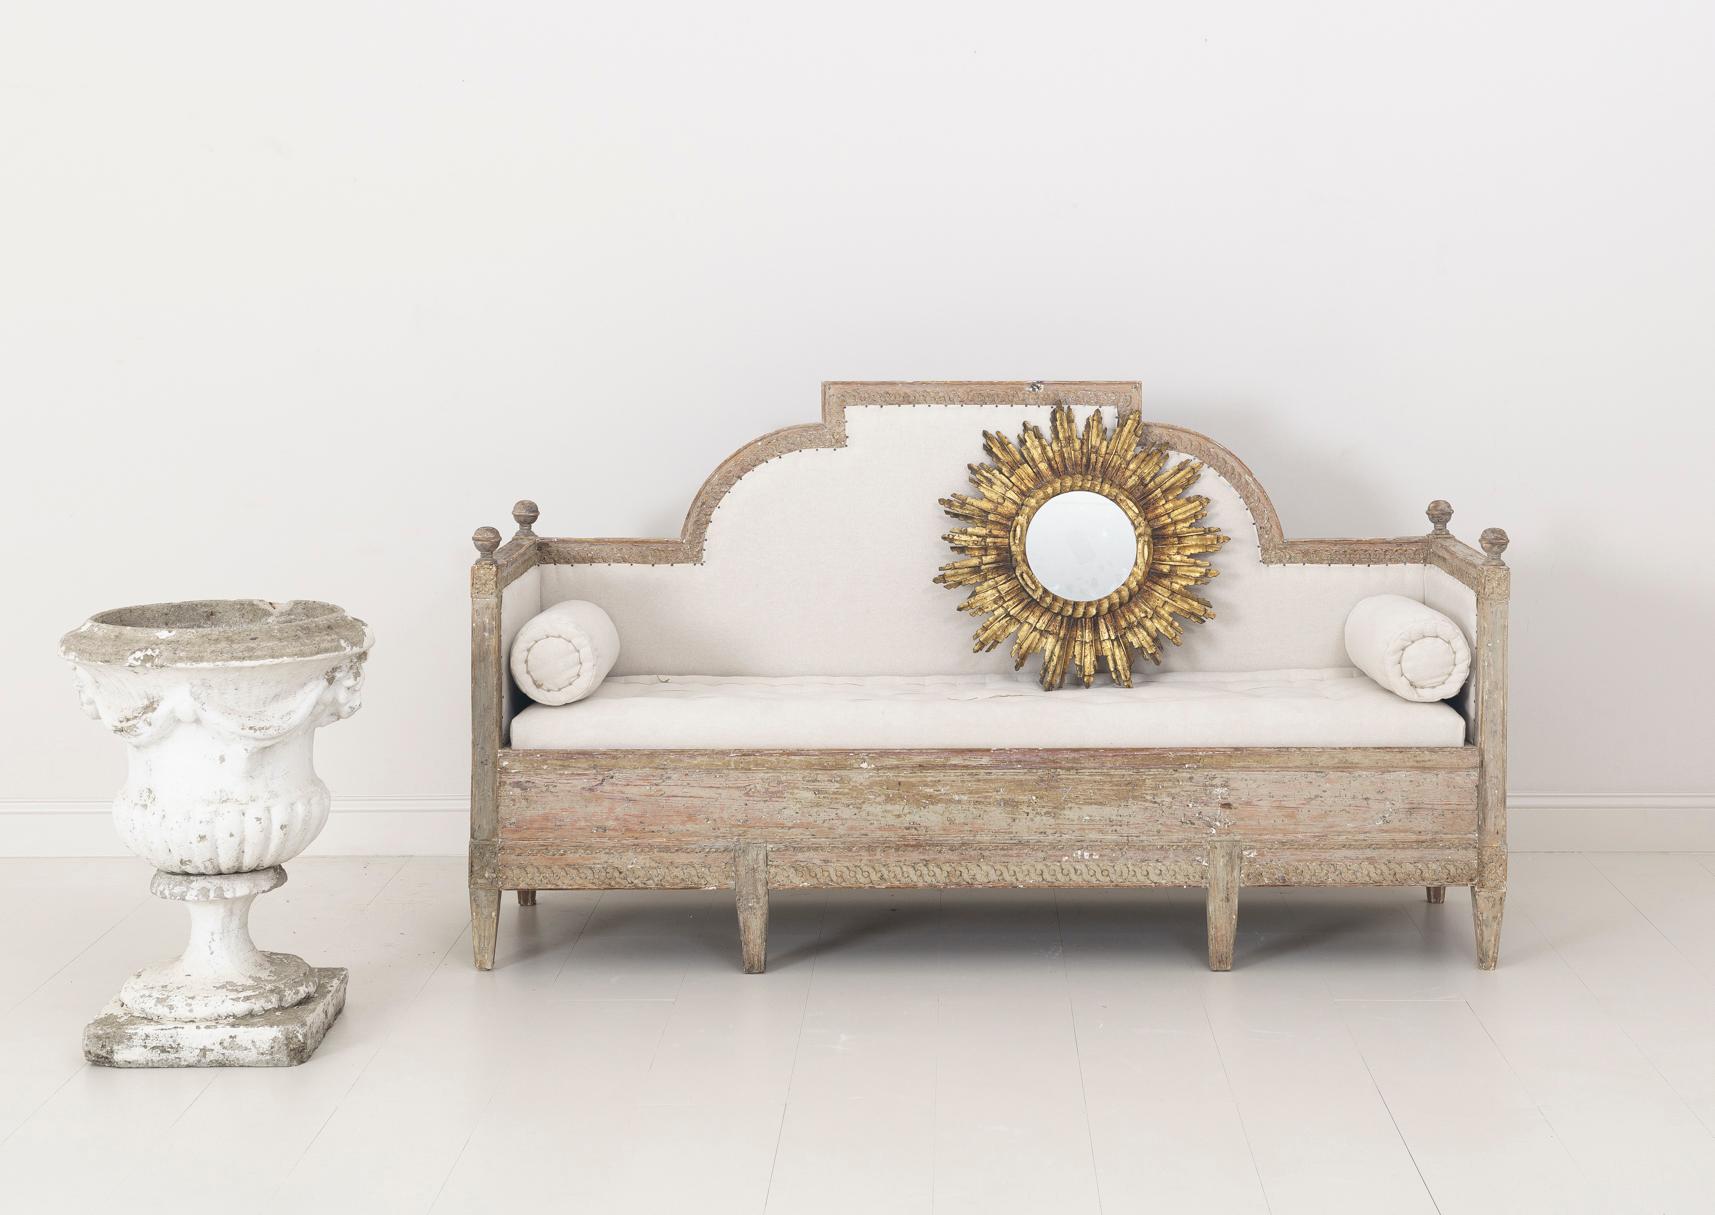 A beautifully carved Swedish sofa bench from the Gustavian period, hand-scraped to reveal the original paint surface and newly upholstered in linen with a hand-stitched tufted seat and side bolster pillows, circa 1800. The back and seat frame